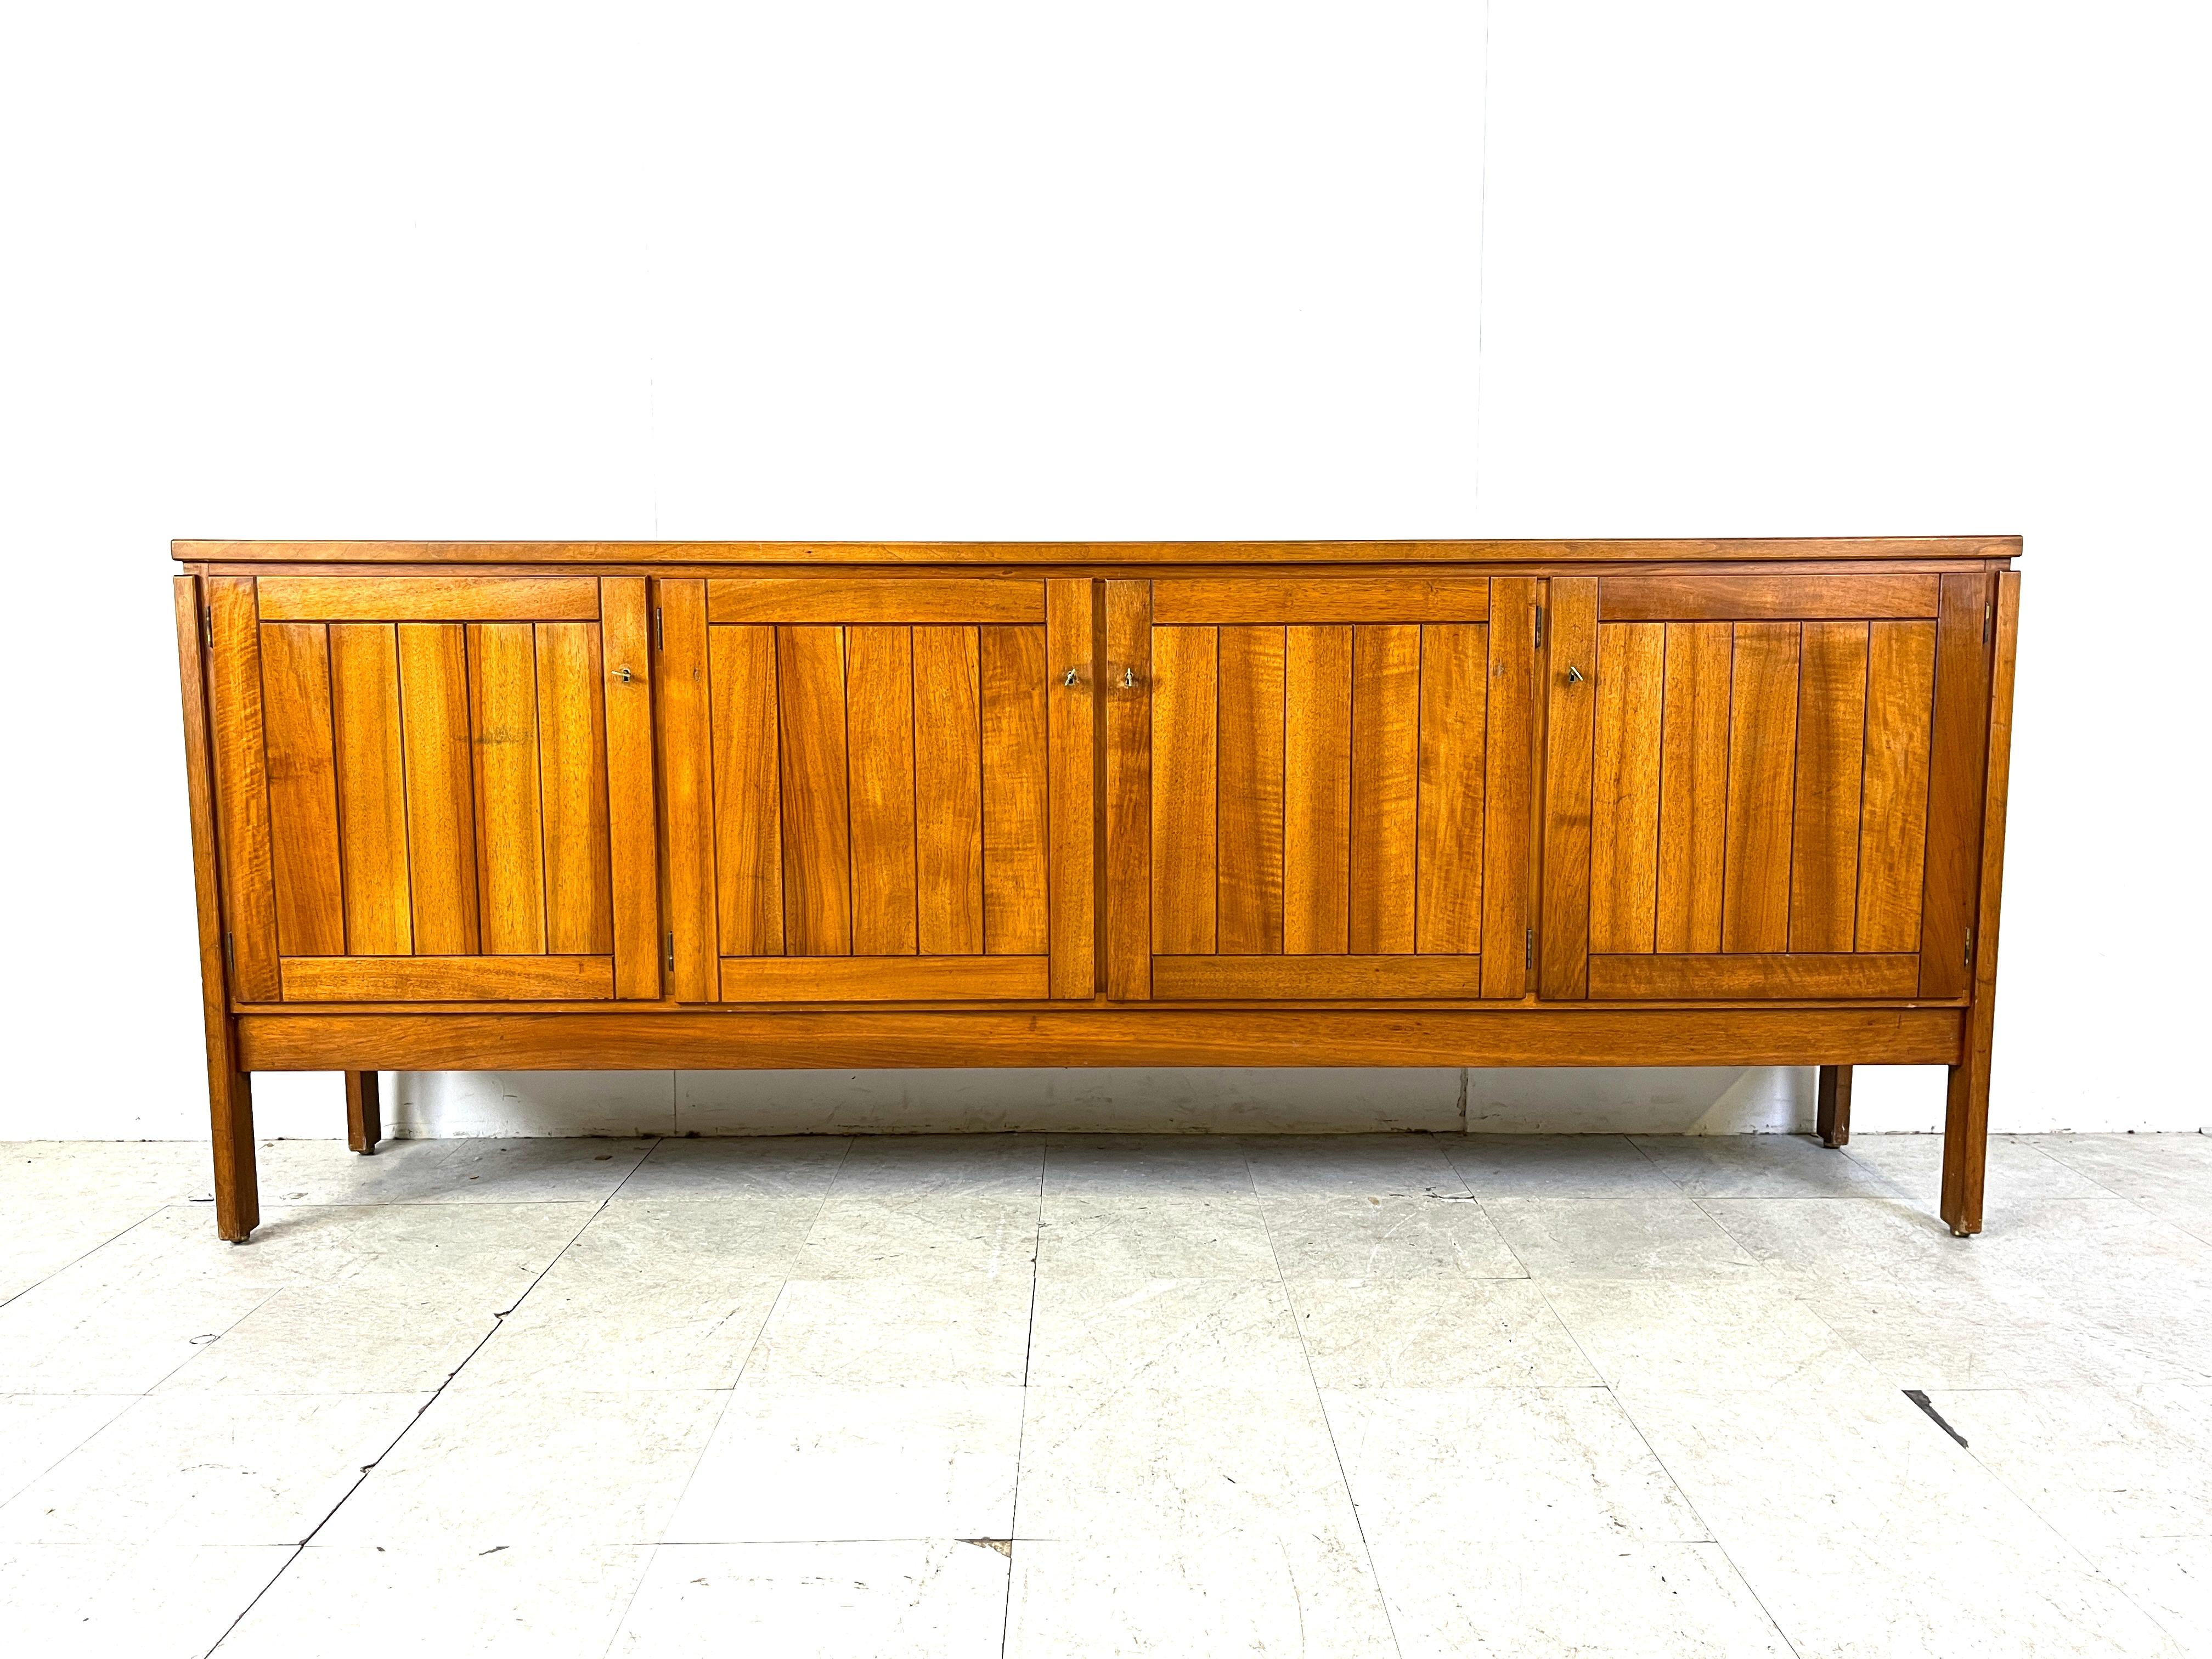 Vintage rustic sideboard made from oak by high end furniture maker Van Den Berghe - Pauvers.

The sideboard is labelled inside the right door.

High quality oak, very well assembled with the best knowledge of furniture making.

The rustic look makes